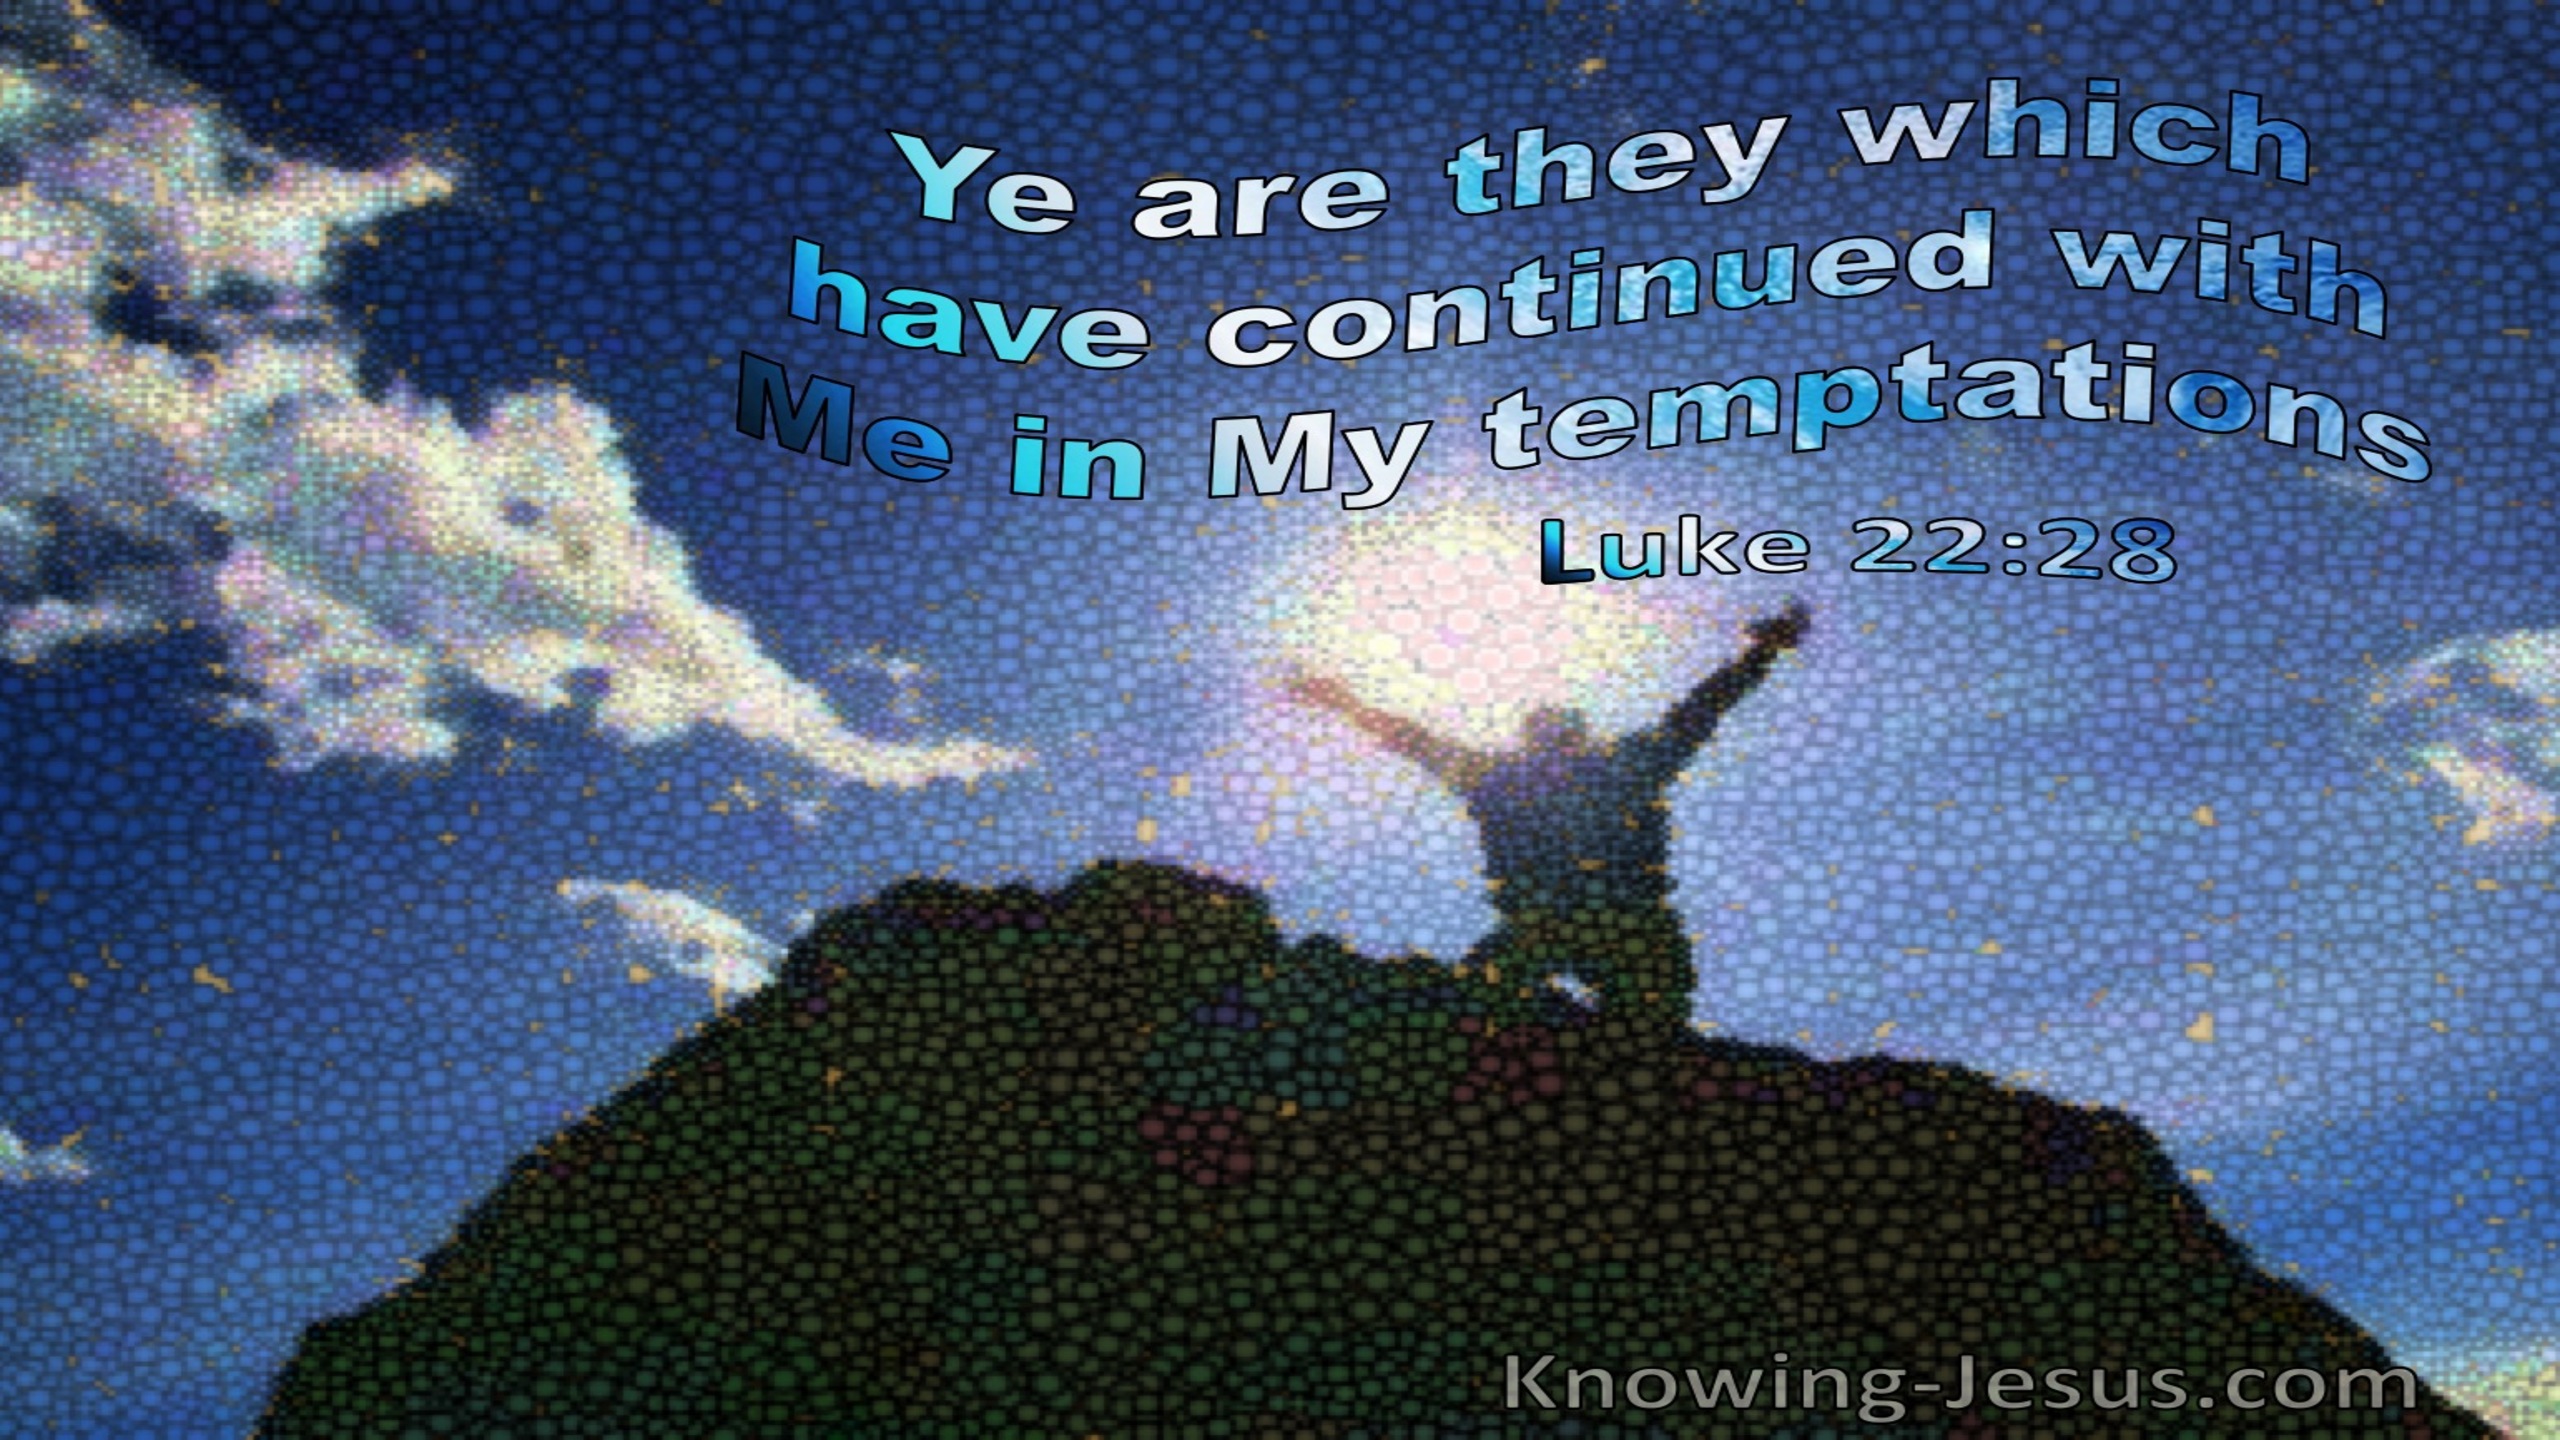 Luke 22:28 Ye Are They Who Continue With Me In My Temptation (utmost)09:19